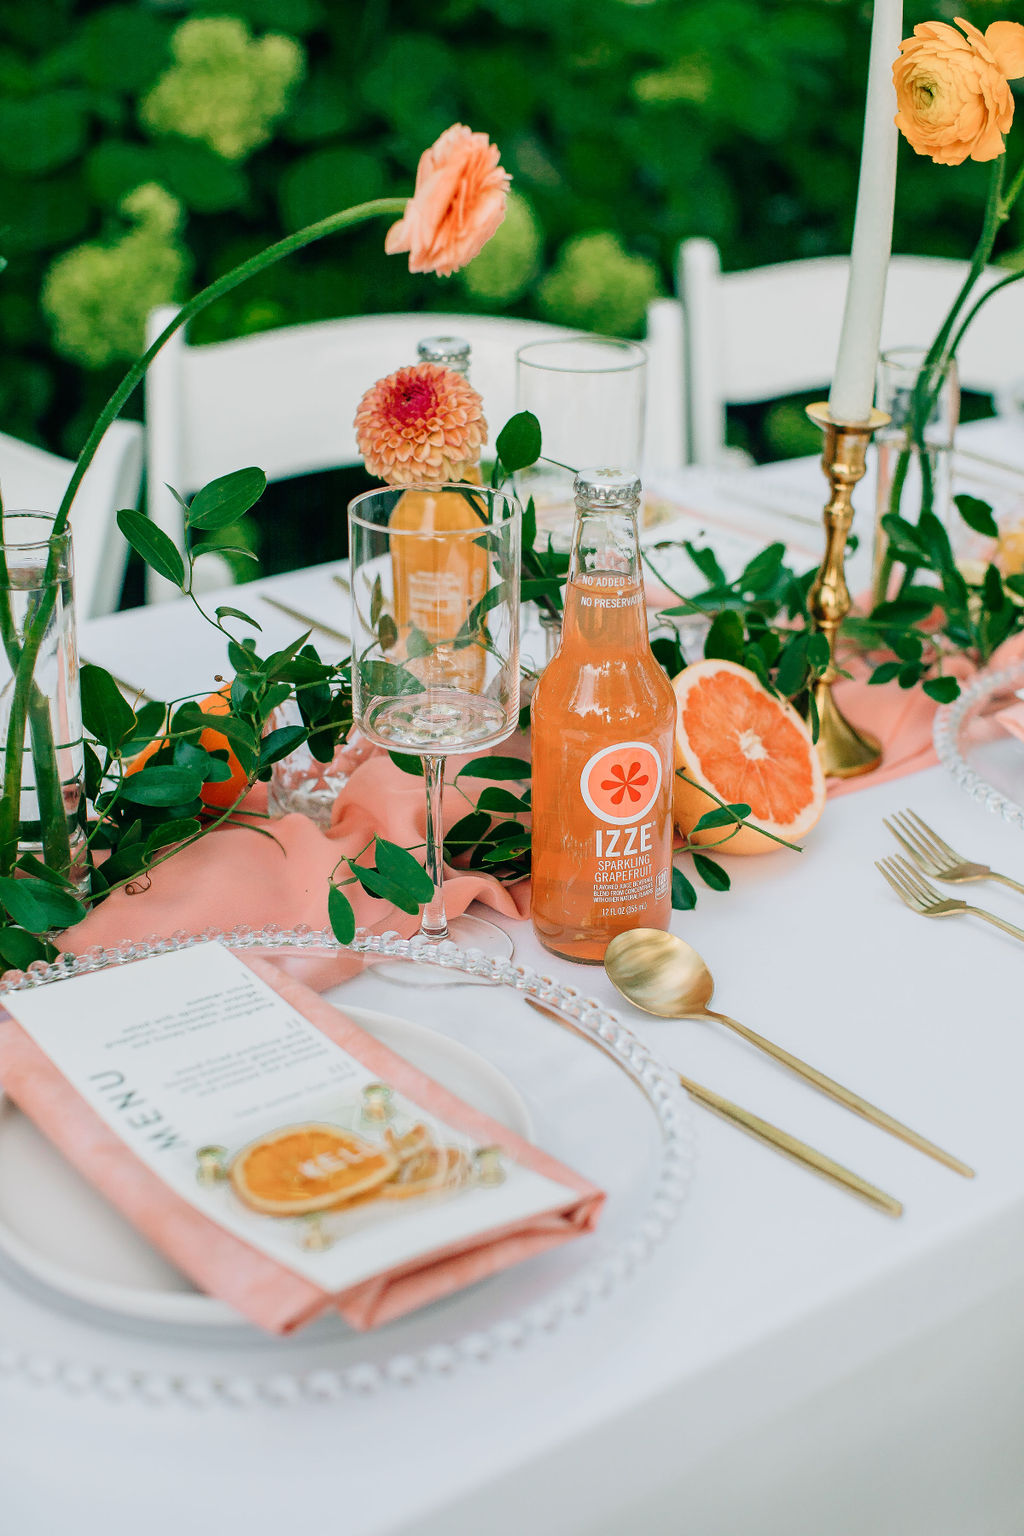 Kaushay & Co. shares their tips to creating the perfect tablescape to show off your personal style on your wedding day! #weddingdecorinspo #weddingplannersinutahcounty #tablescapeinspiration #midwestweddingplanner #kaushayandcoevents #luxuryeventplanner